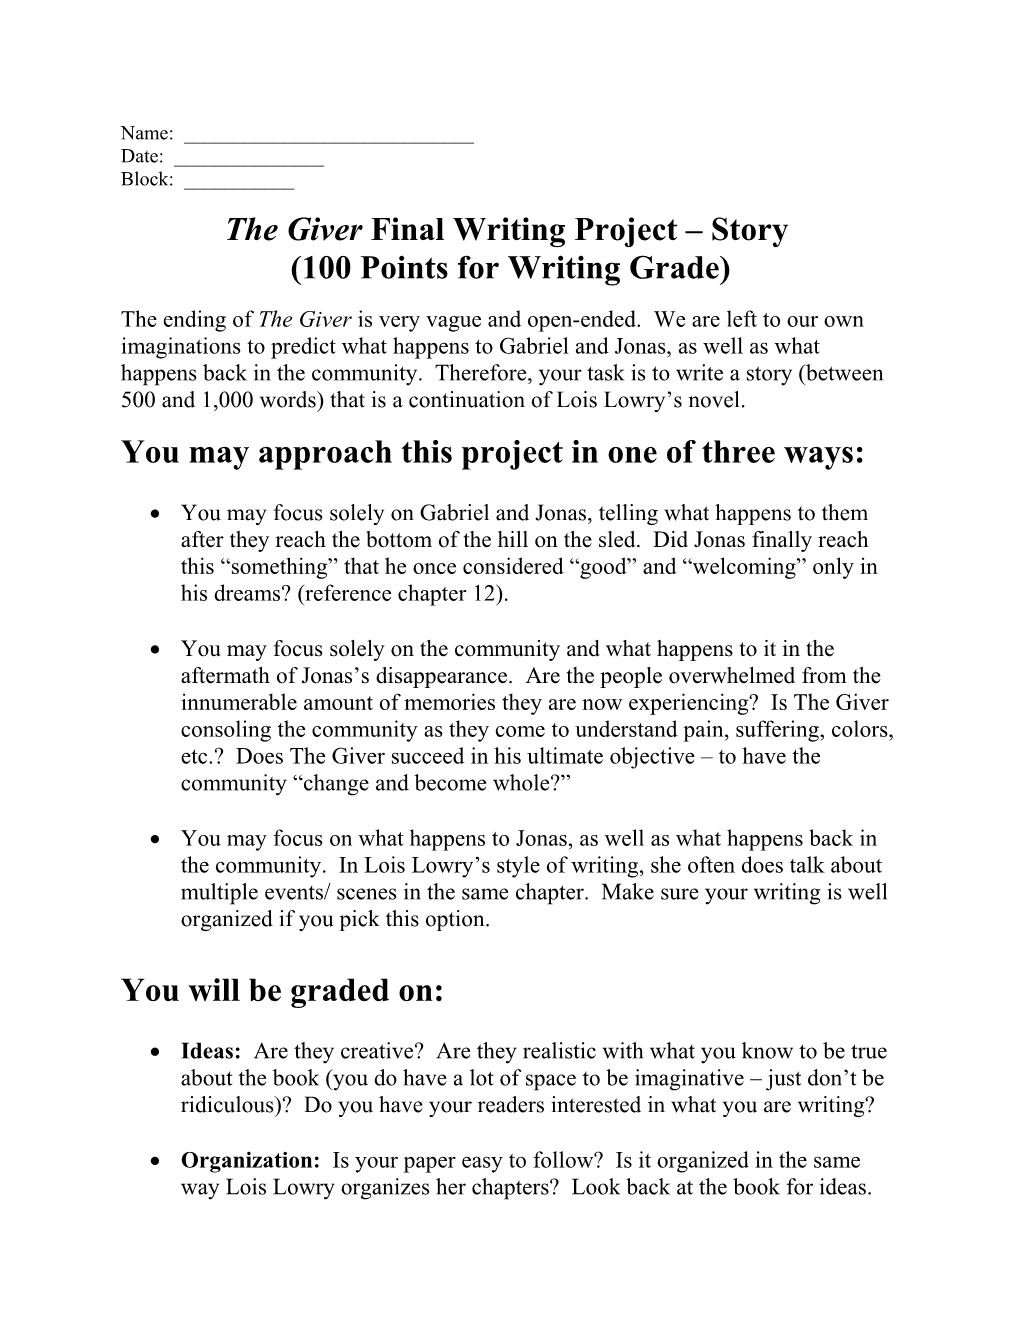 The Giver Final Writing Project Story